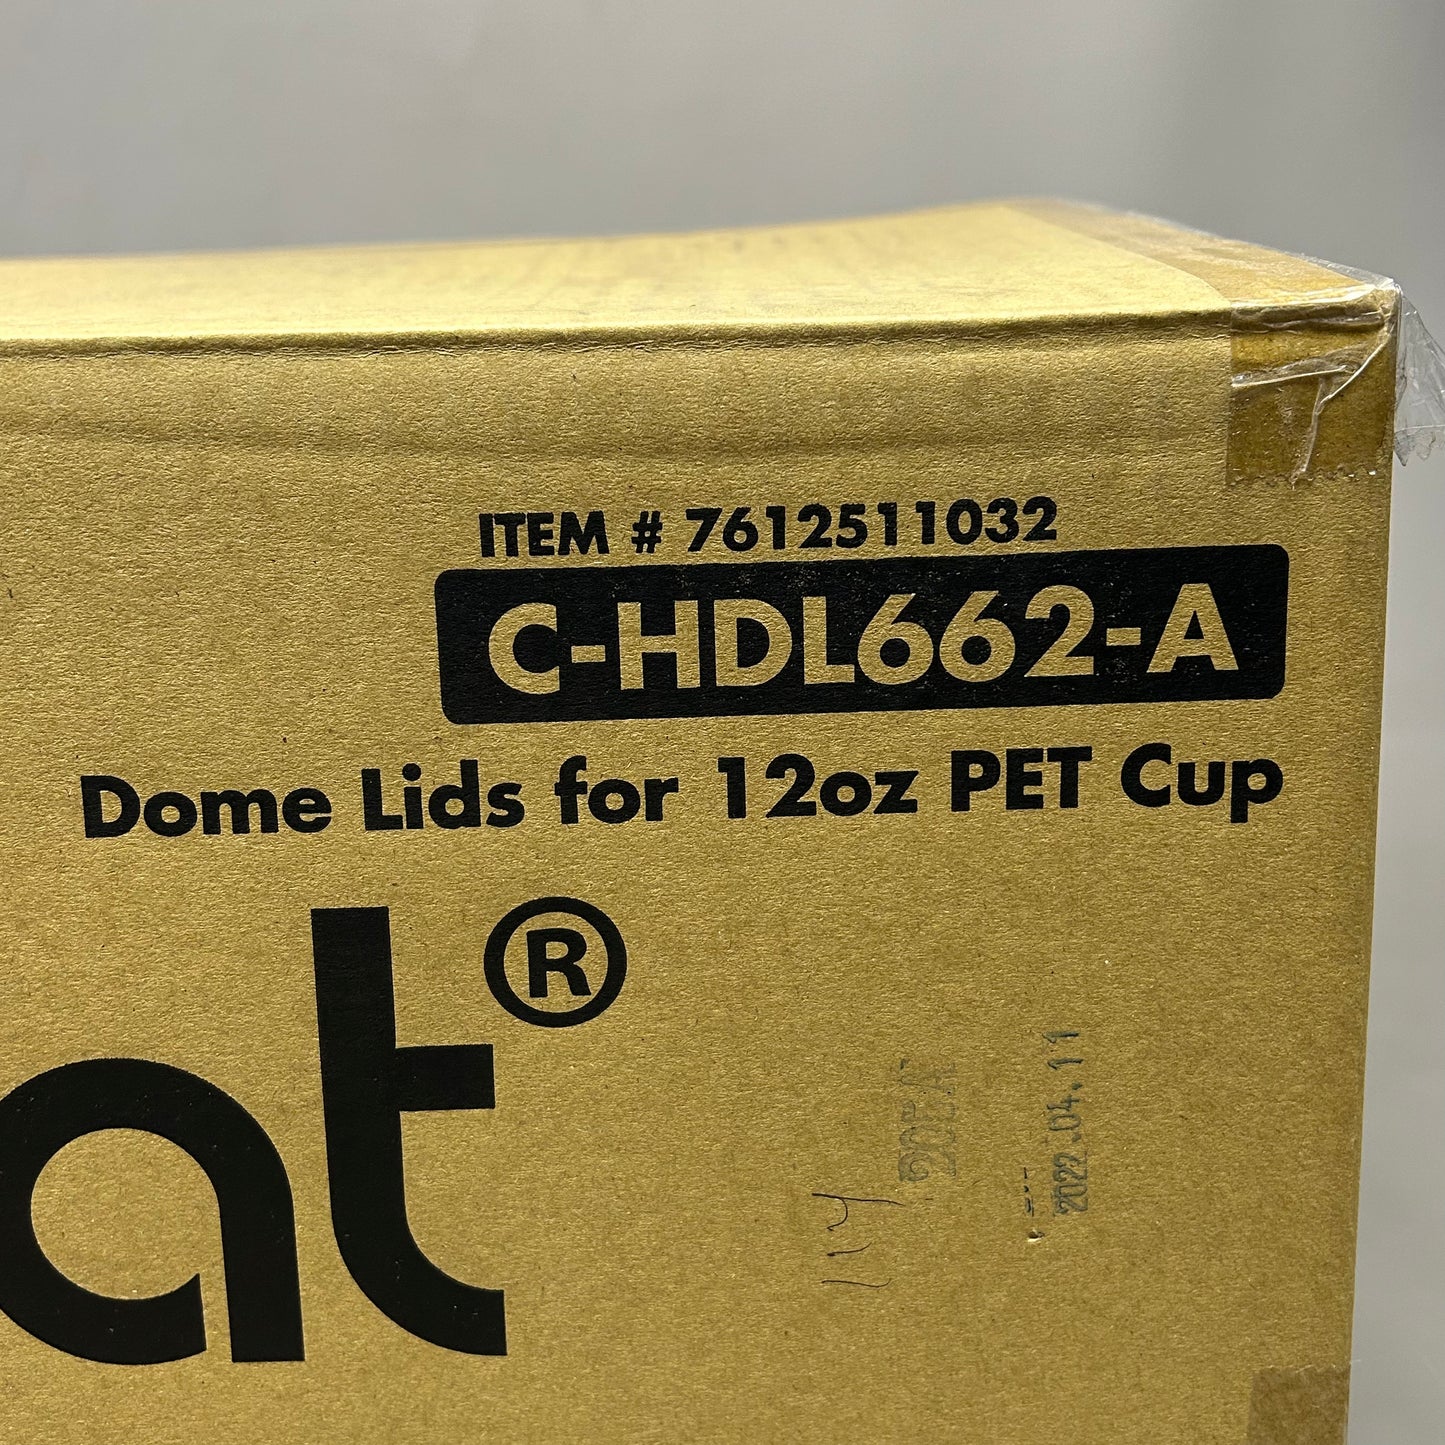 ZA@ KARAT Dome Lids for 12 oz PET Cup 92 mm Recyclable Plastic Clear 1000 ct (New)